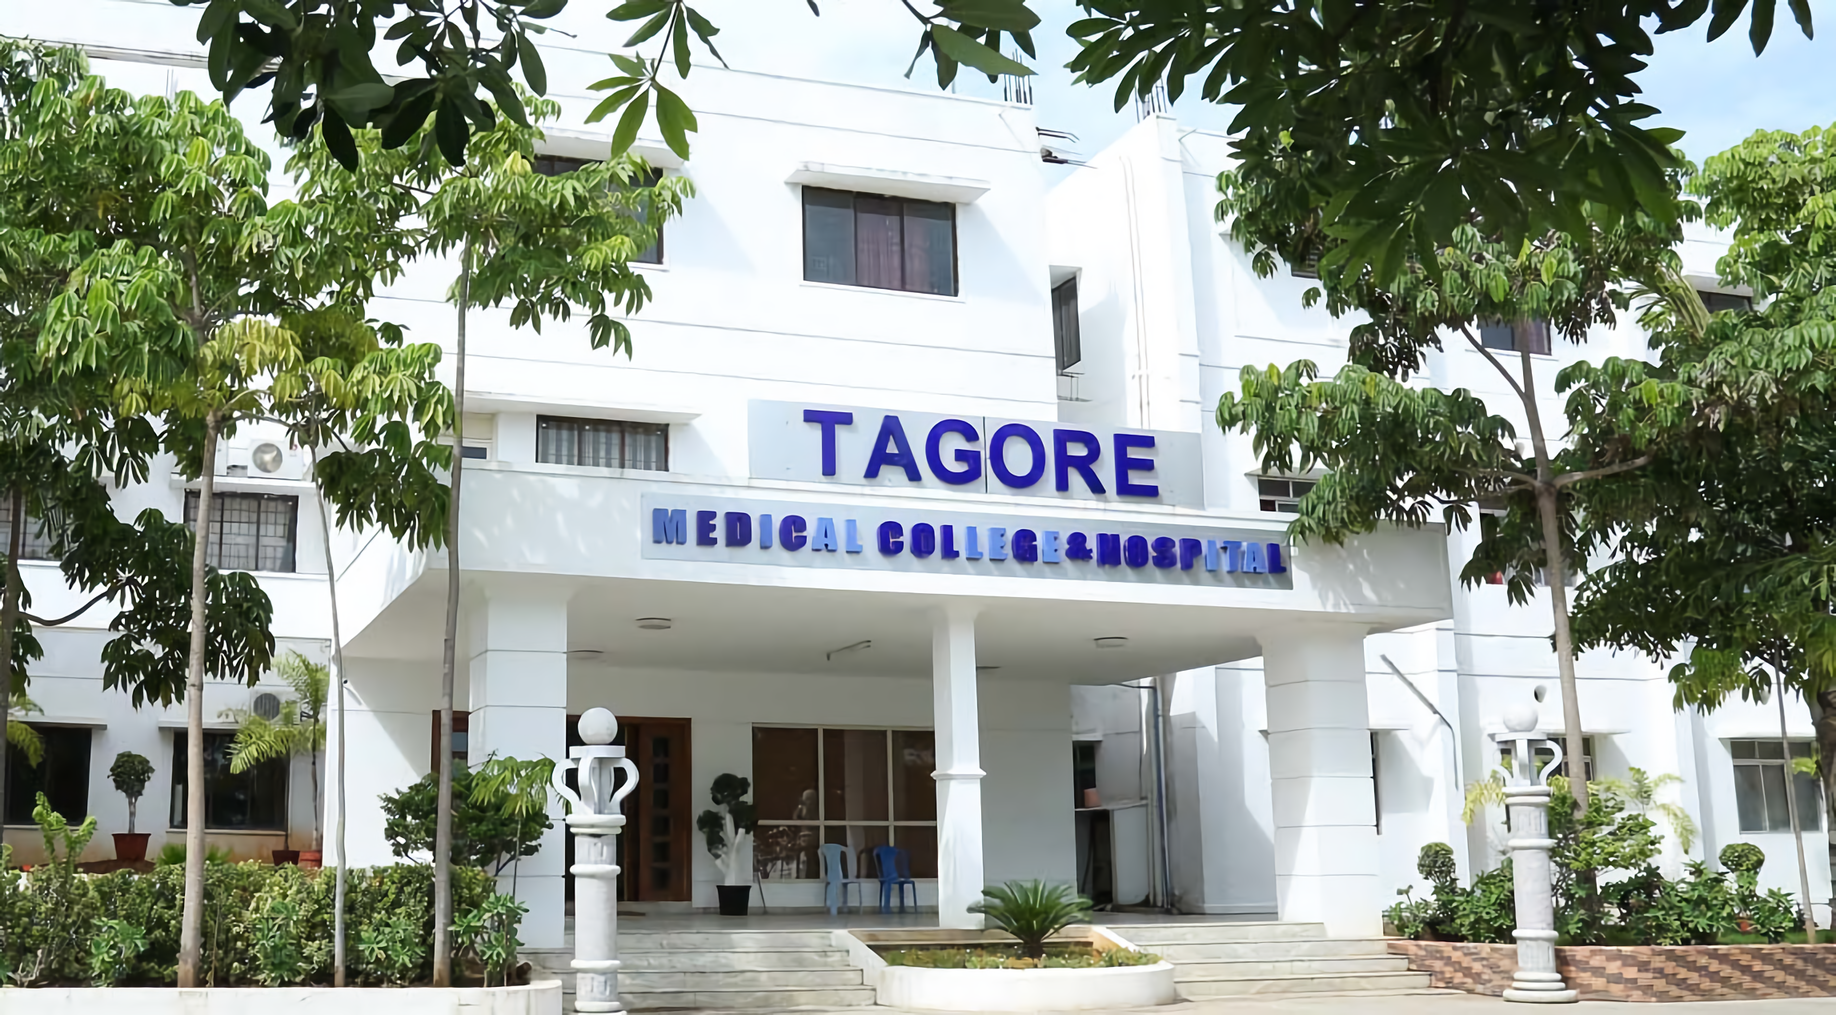 Tagore Medical College And Hospital